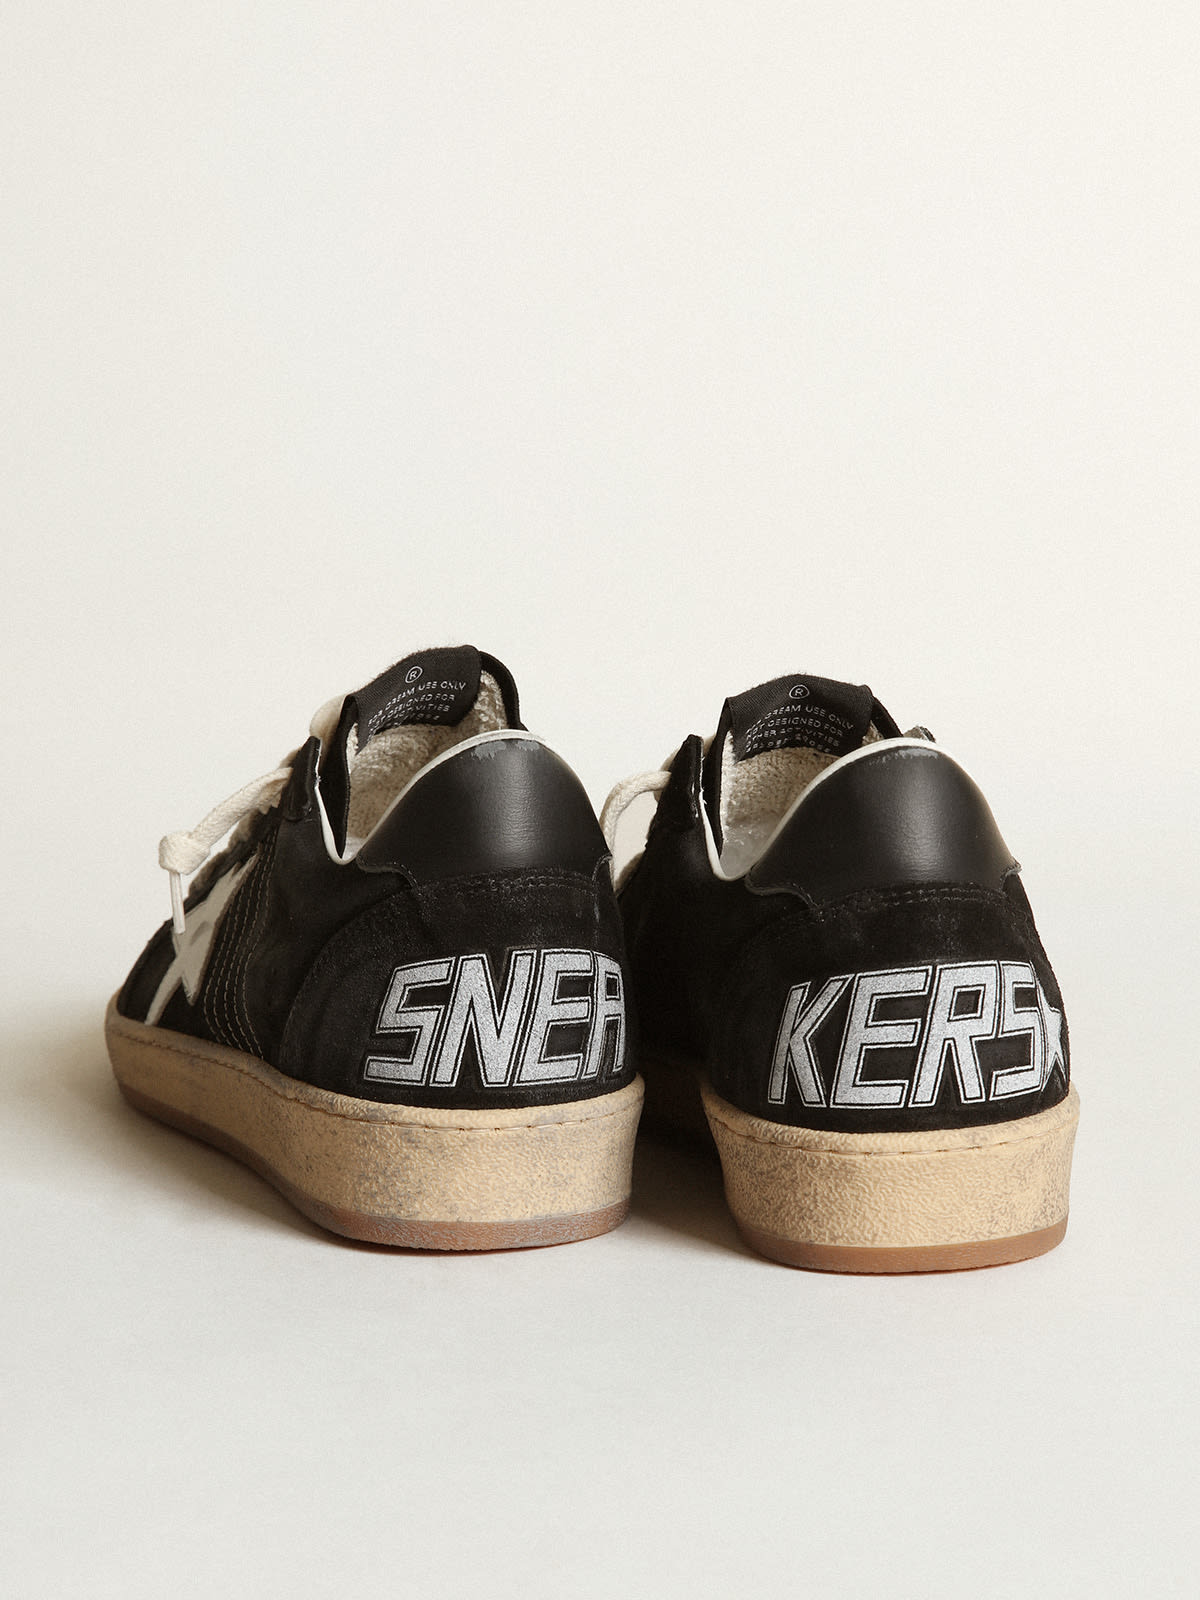 Golden Goose - Men’s Ball Star sneakers in black suede with white leather star and black leather heel tab in 